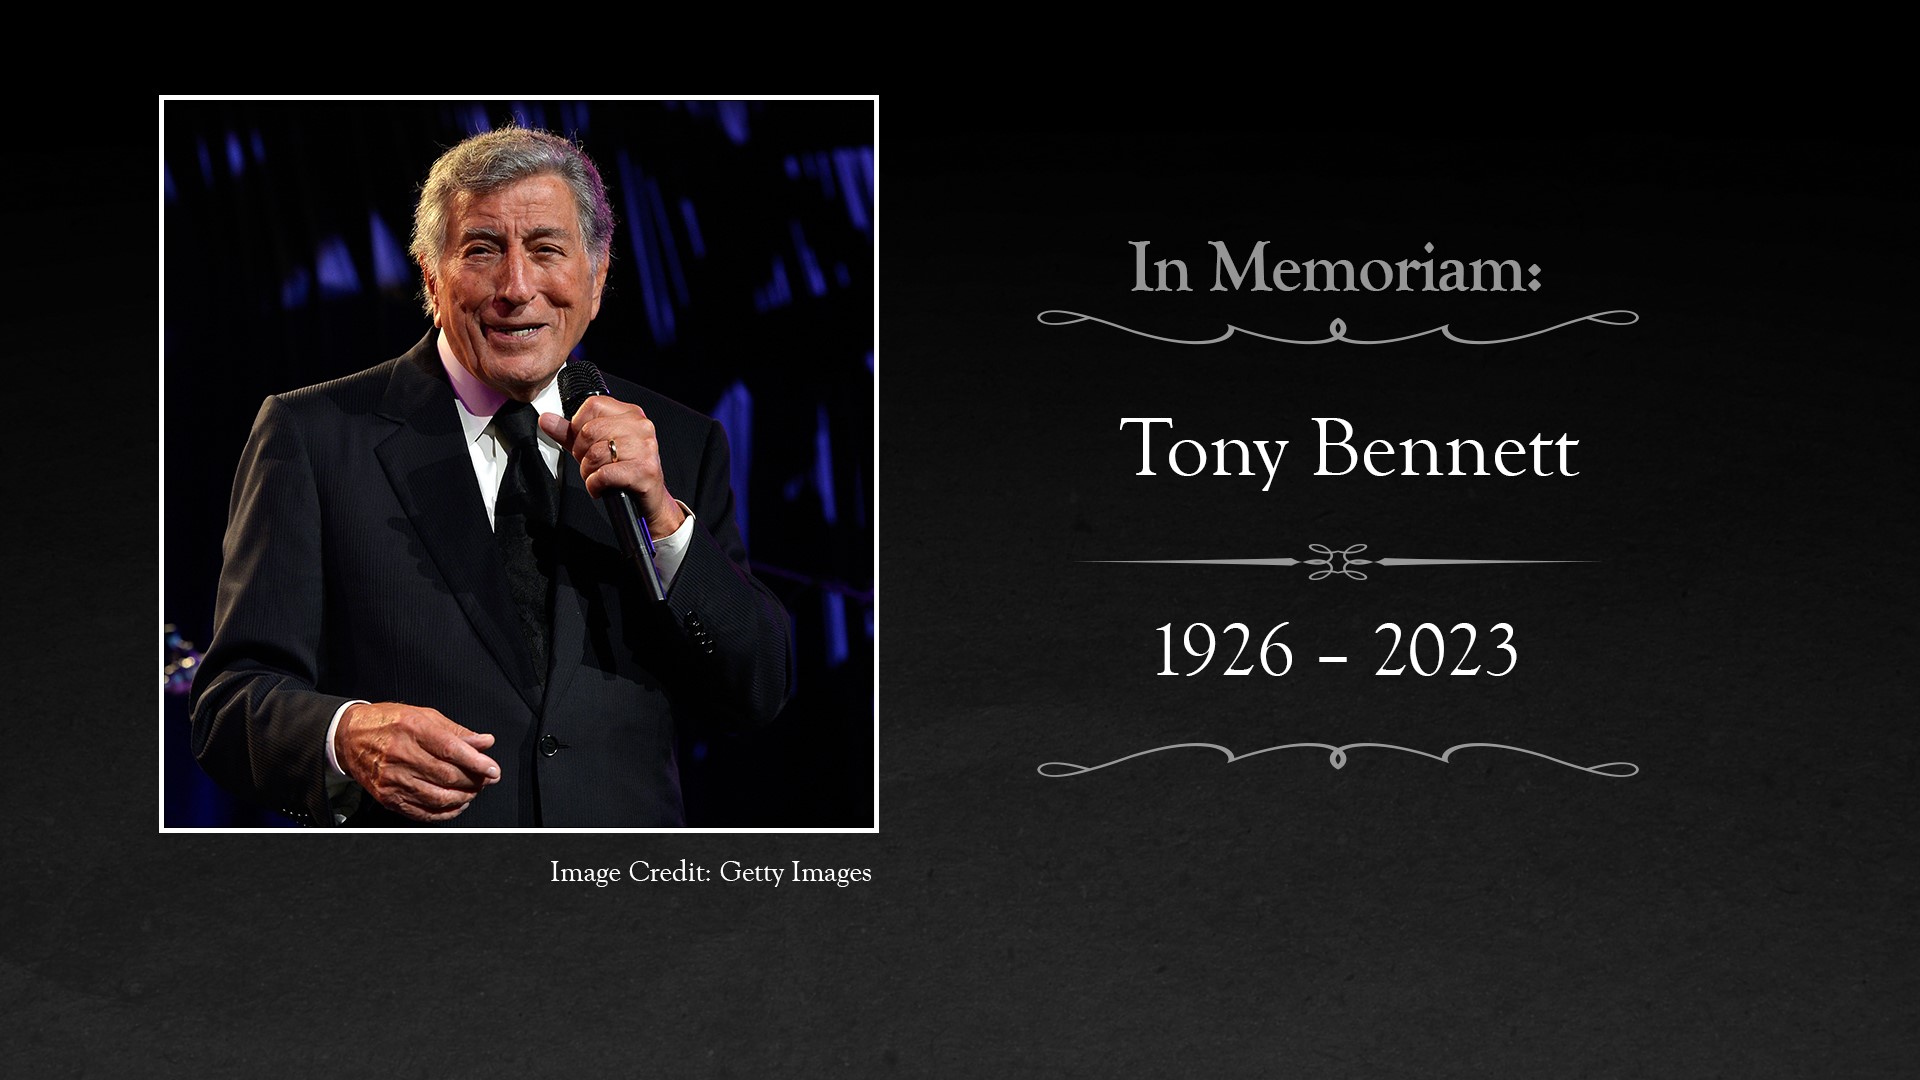 Tony Bennett's Wife and Son Honor His Life and Humanity After Death